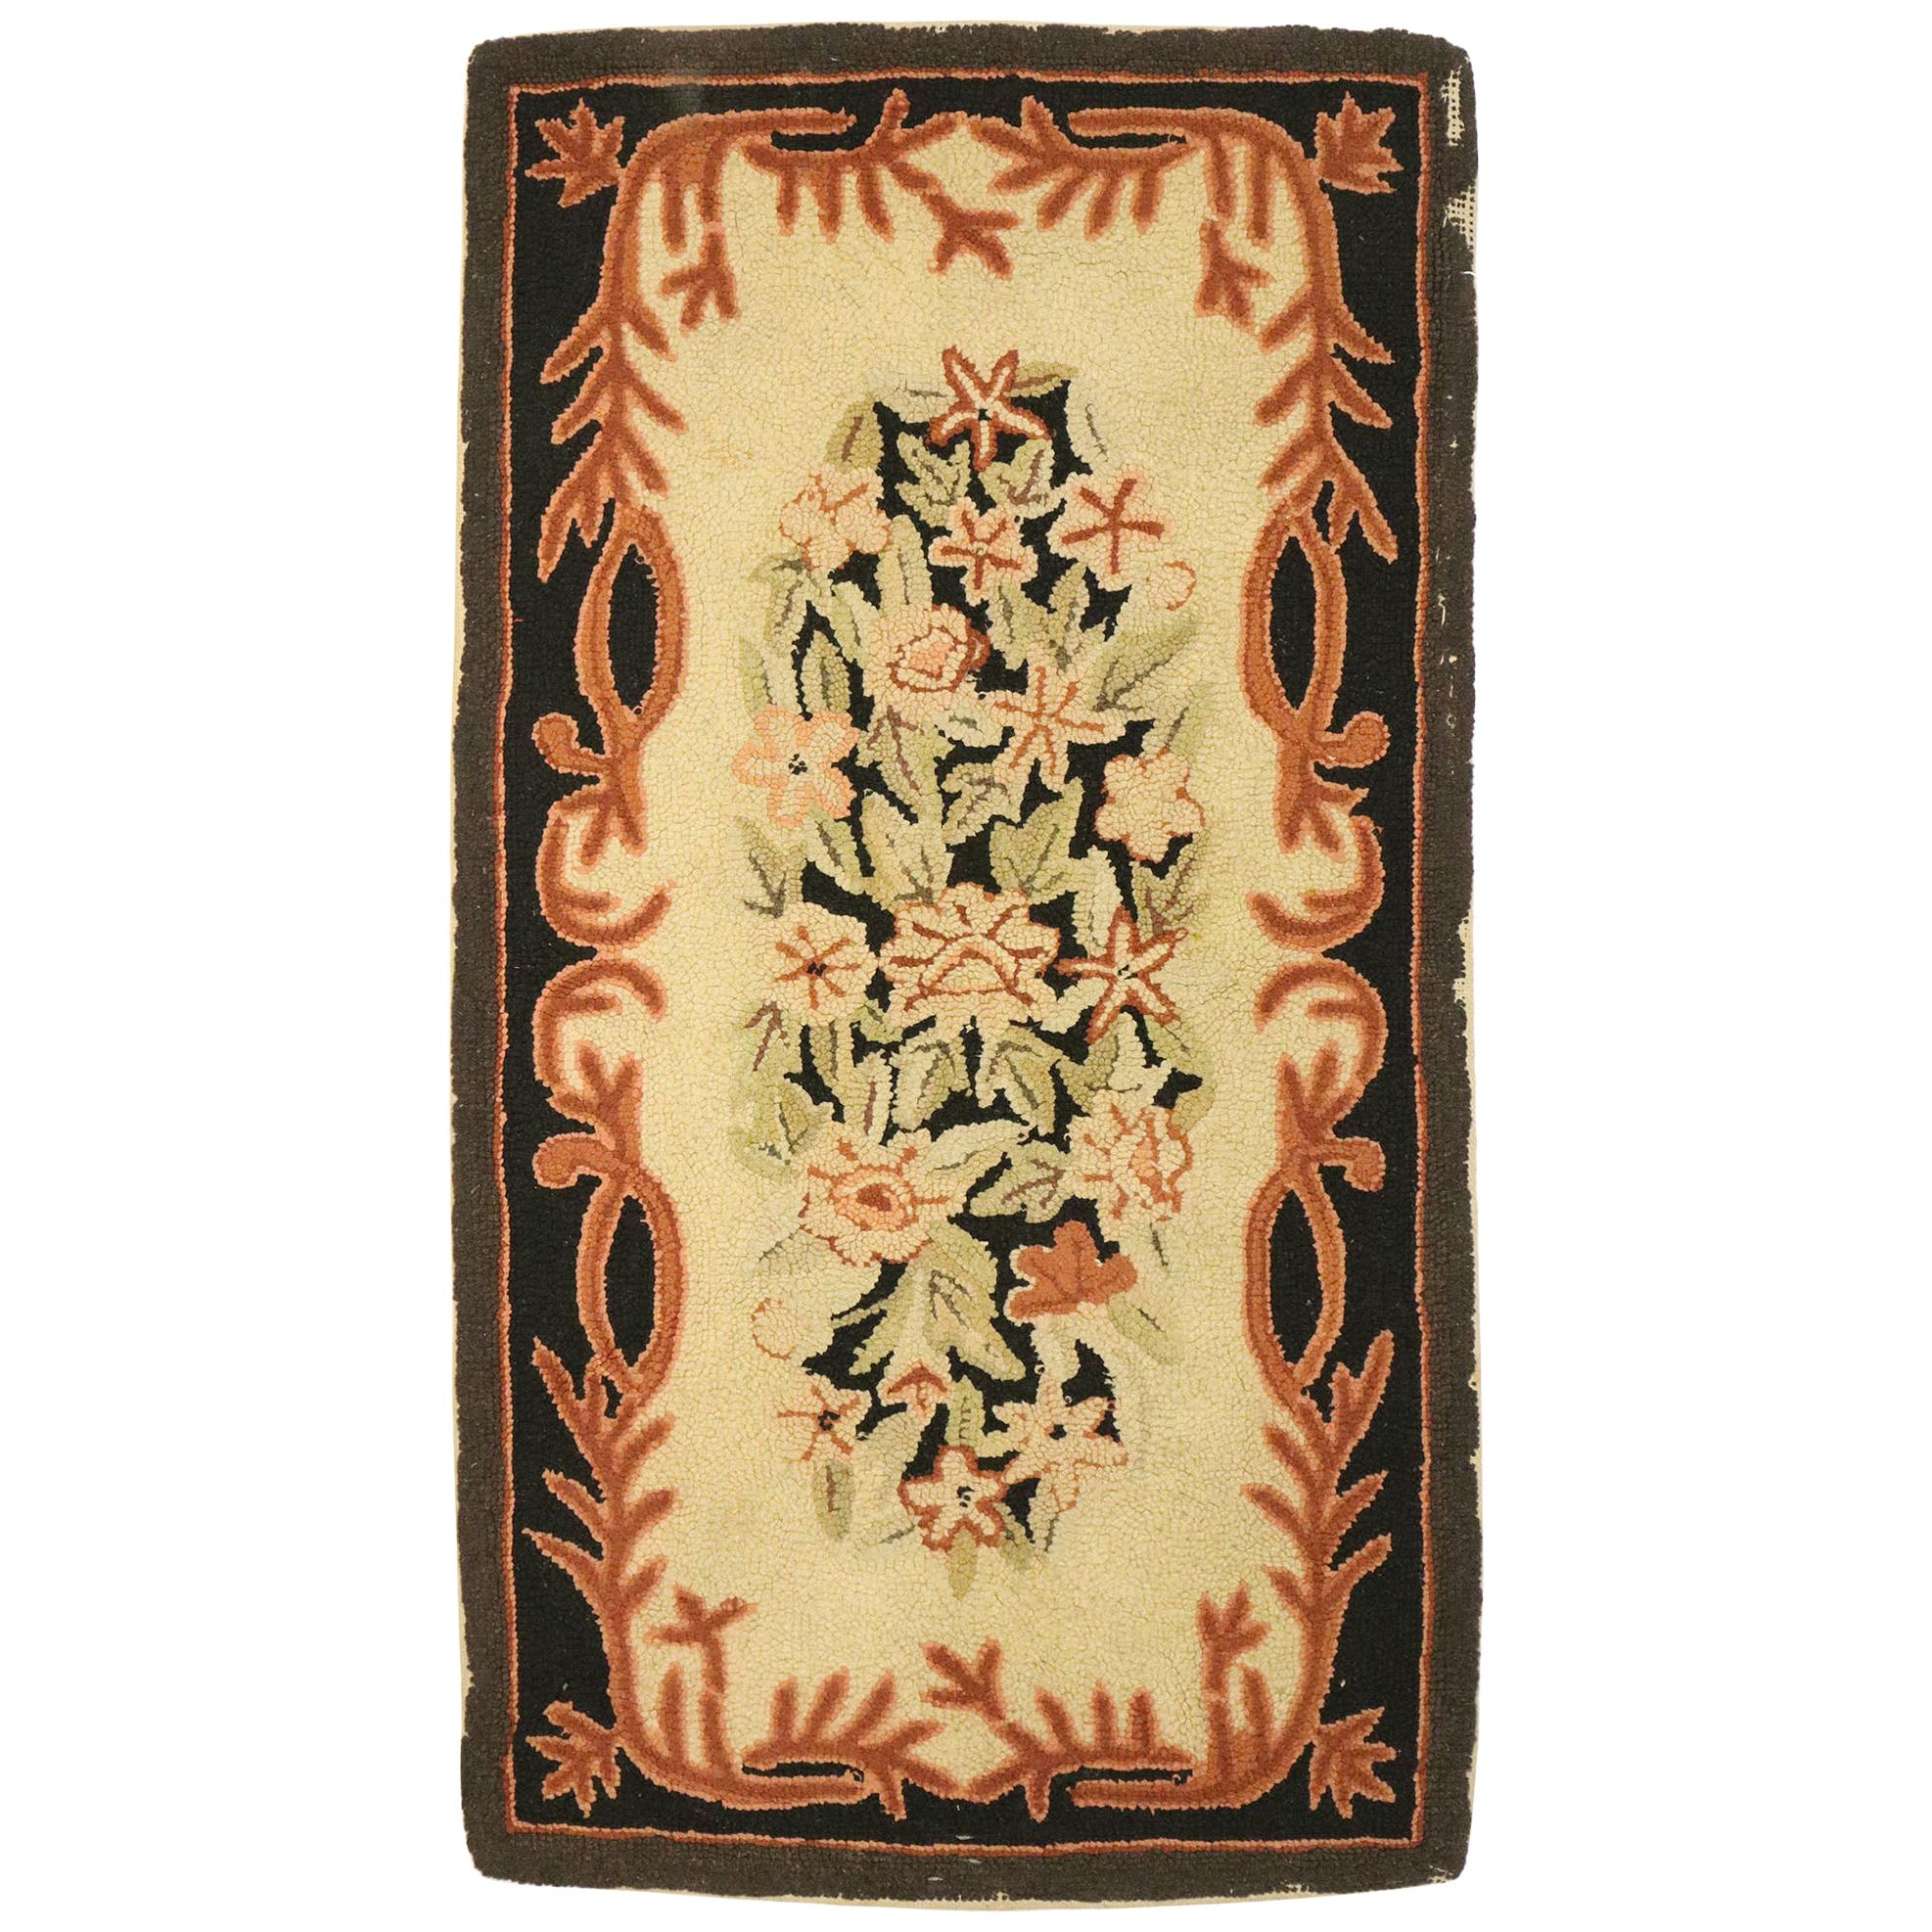 Antique American Floral Hooked Rug with French Provincial Style